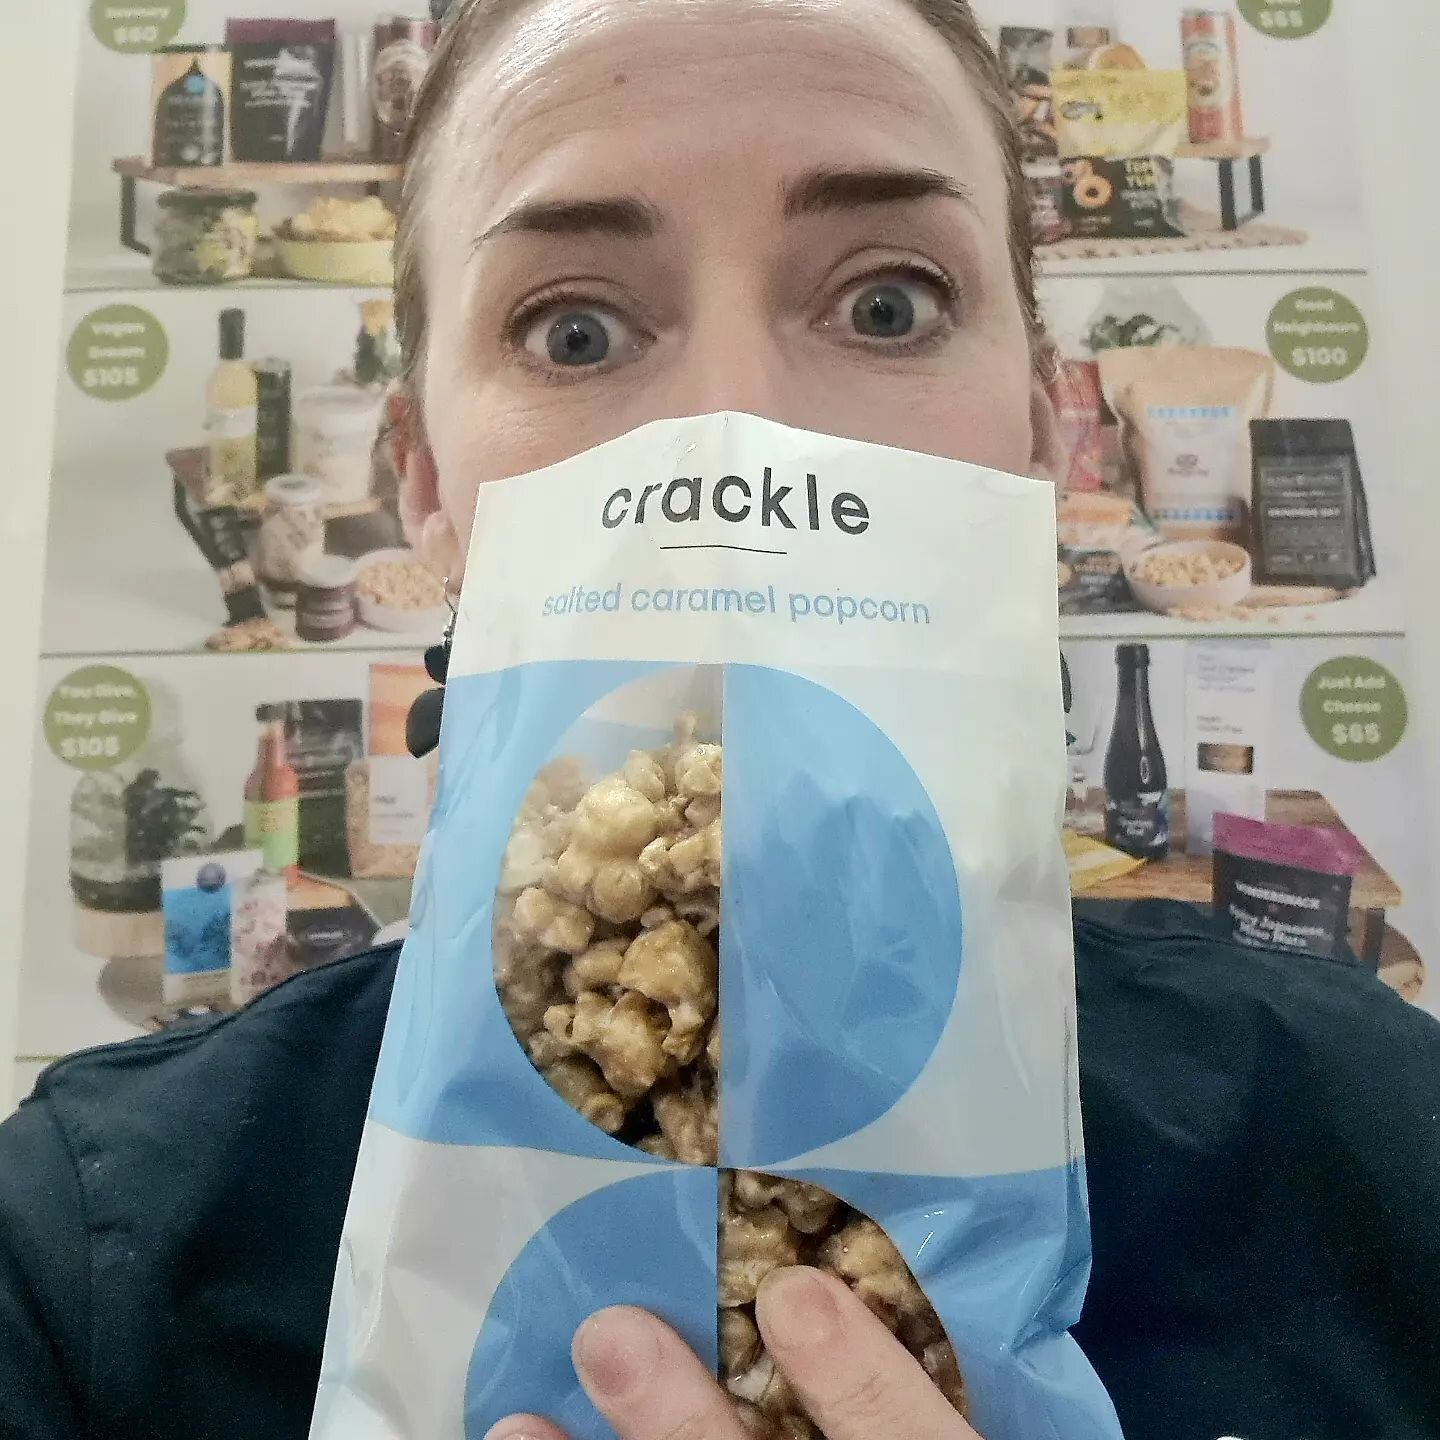 Got the Friday munchies??

We have almost SOLD OUT of our first delivery of @cracklecorn. The secret is out!

Hand made in Melbourne. They come in 4 different flavours:

🍿Chocolate Caramel
🍿Rosemary Caramel (our fav!)
🍿Salted Caramel
🍿Peanut butt